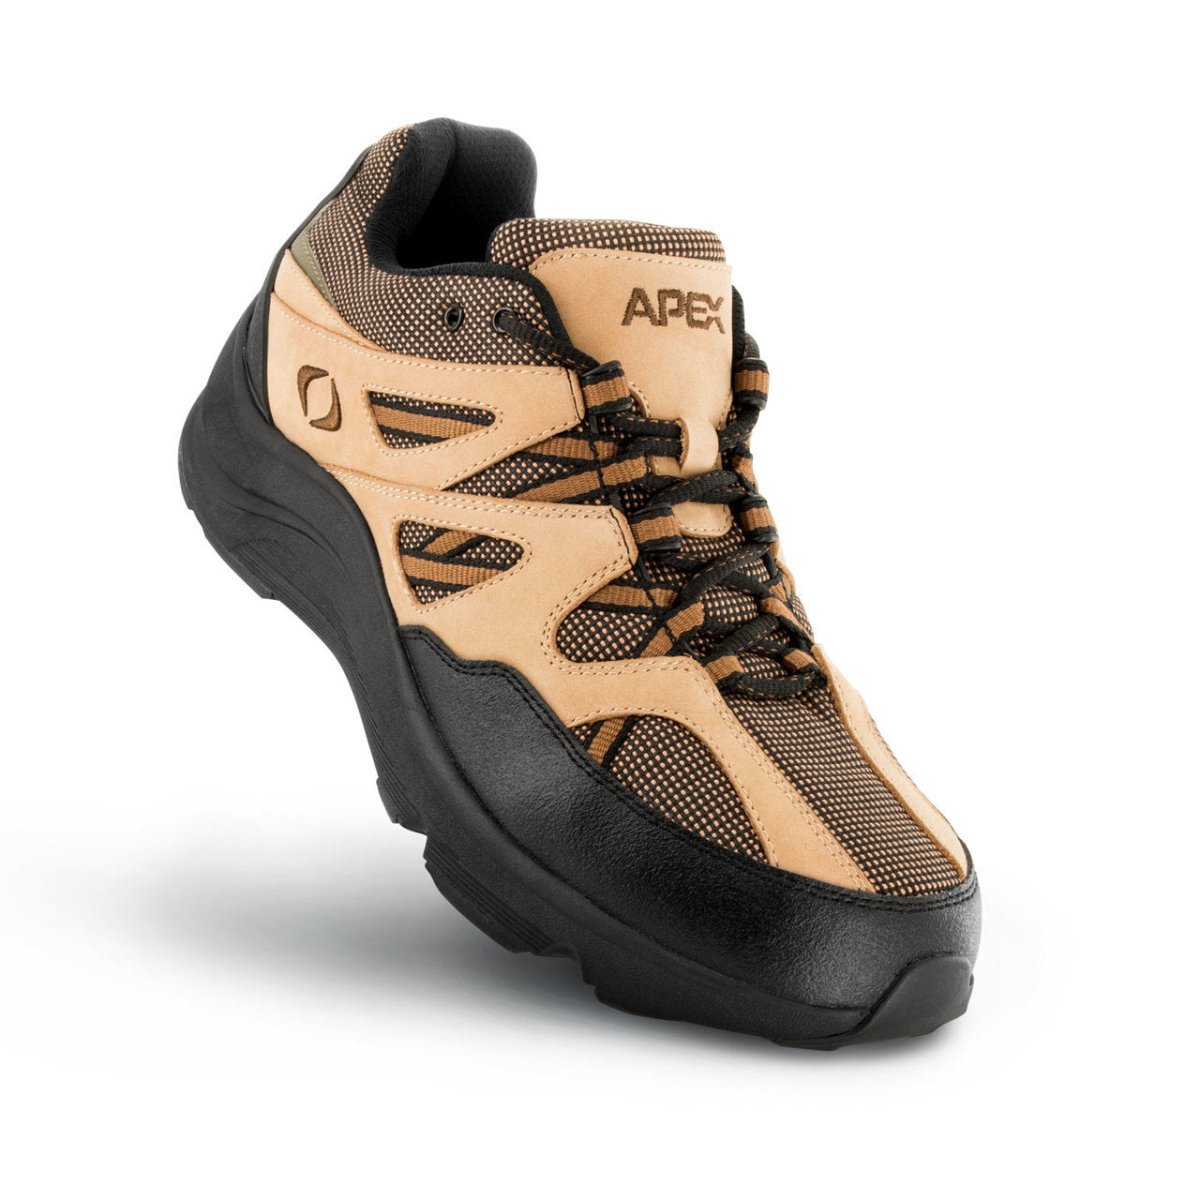 APEX V751 SIERRA TRAIL RUN WOMEN'S ACTIVE SHOE IN BROWN - TLW Shoes